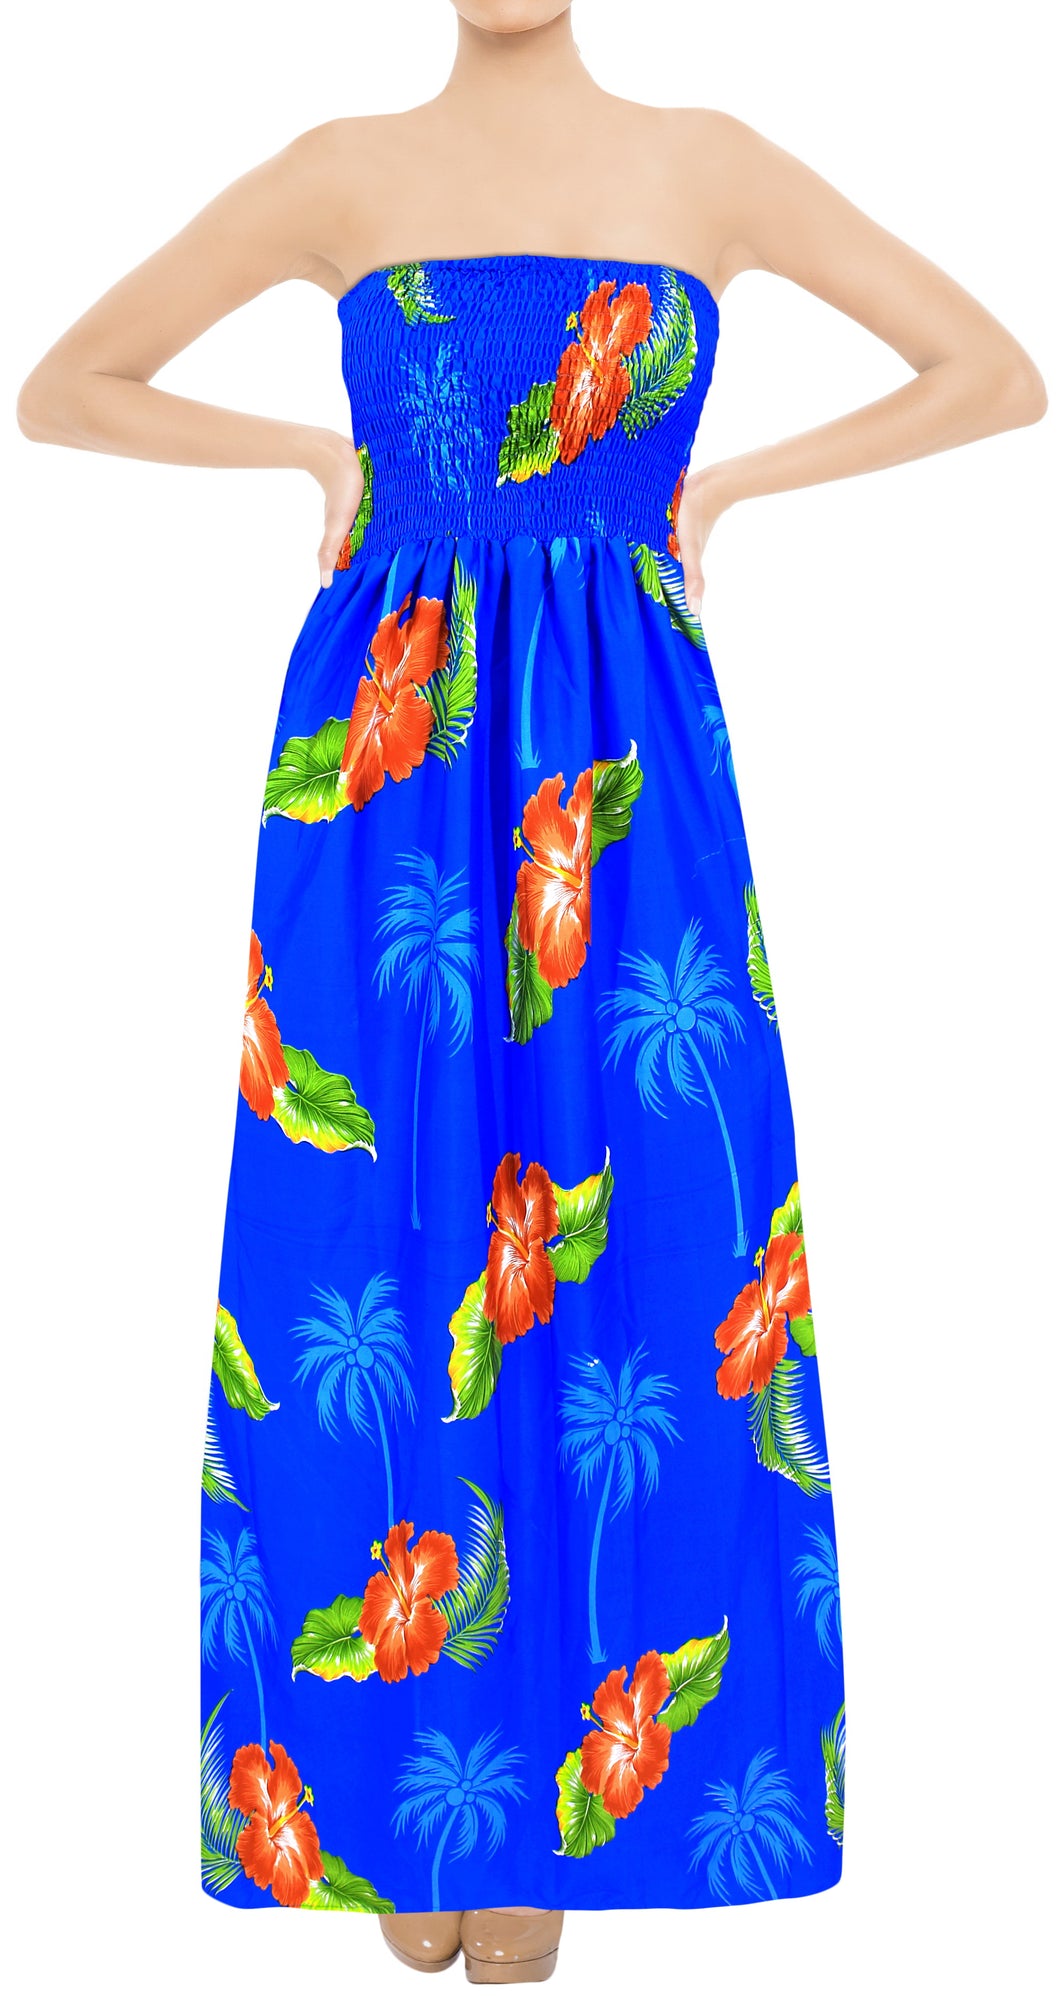 LA LEELA Long Maxi Strappy Tube Dress With Palm Tree And Flower Print For Women Casual Beachwear Chic Everyday Sundress